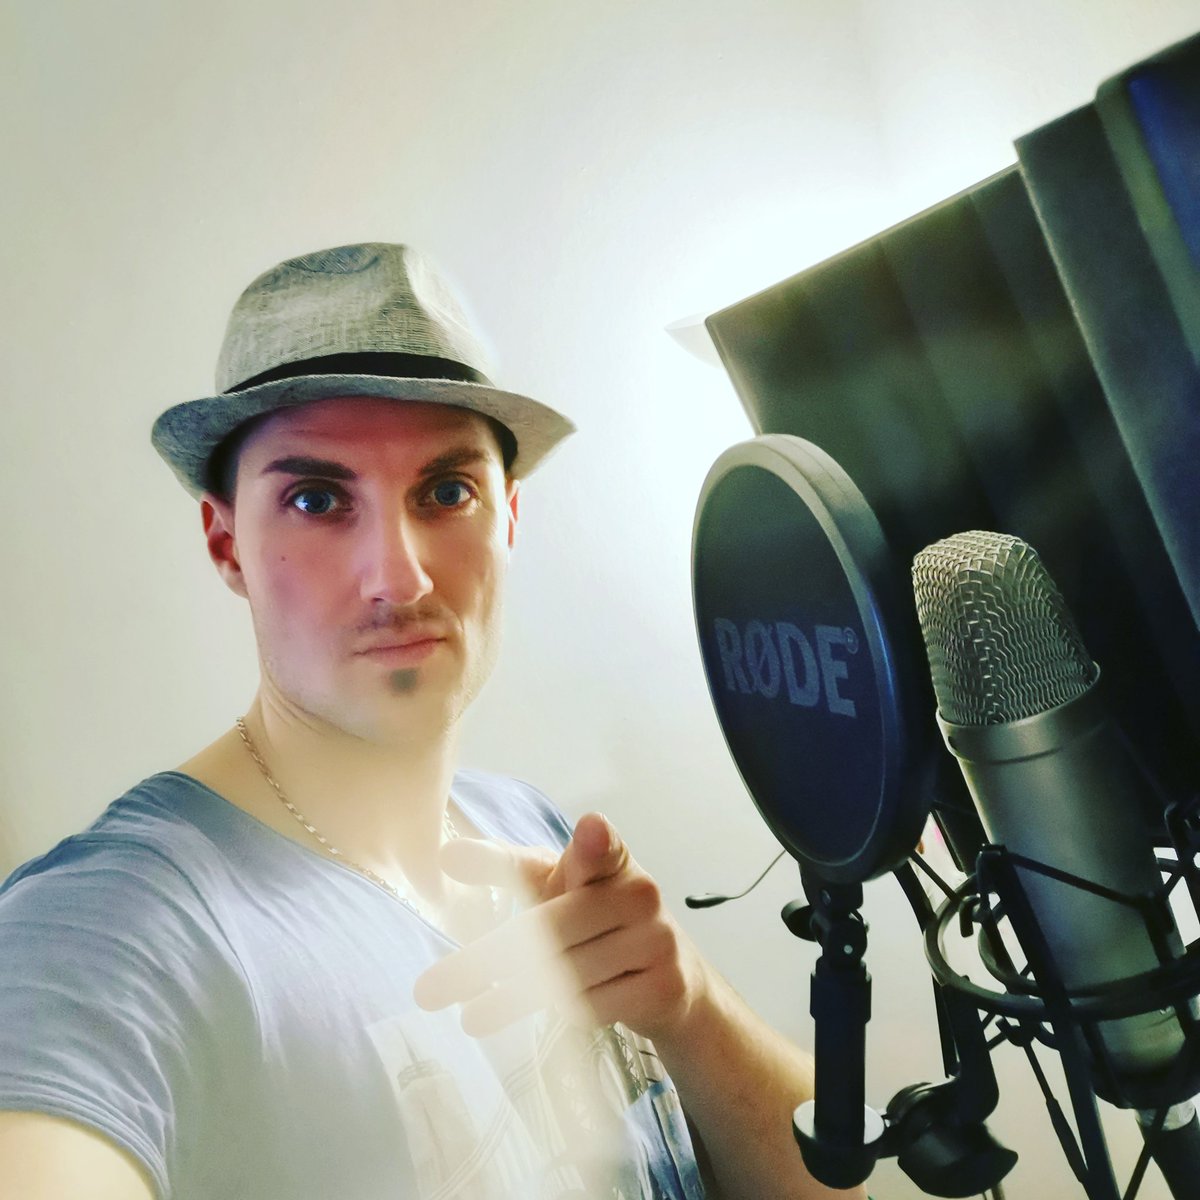 🎙️🎵I'm Yours💯🎶
-
-
-
#vocaltechnique #exercise #vocalexercises #vocalist #dailypic #dailyexercise #vocalhealth #singers #musician #musicianlife #phantom #phantommickey #imyours #selfiemodel #selfiepic #singersofinstagram #singersongwriters #singingpassion #musicwithpassion